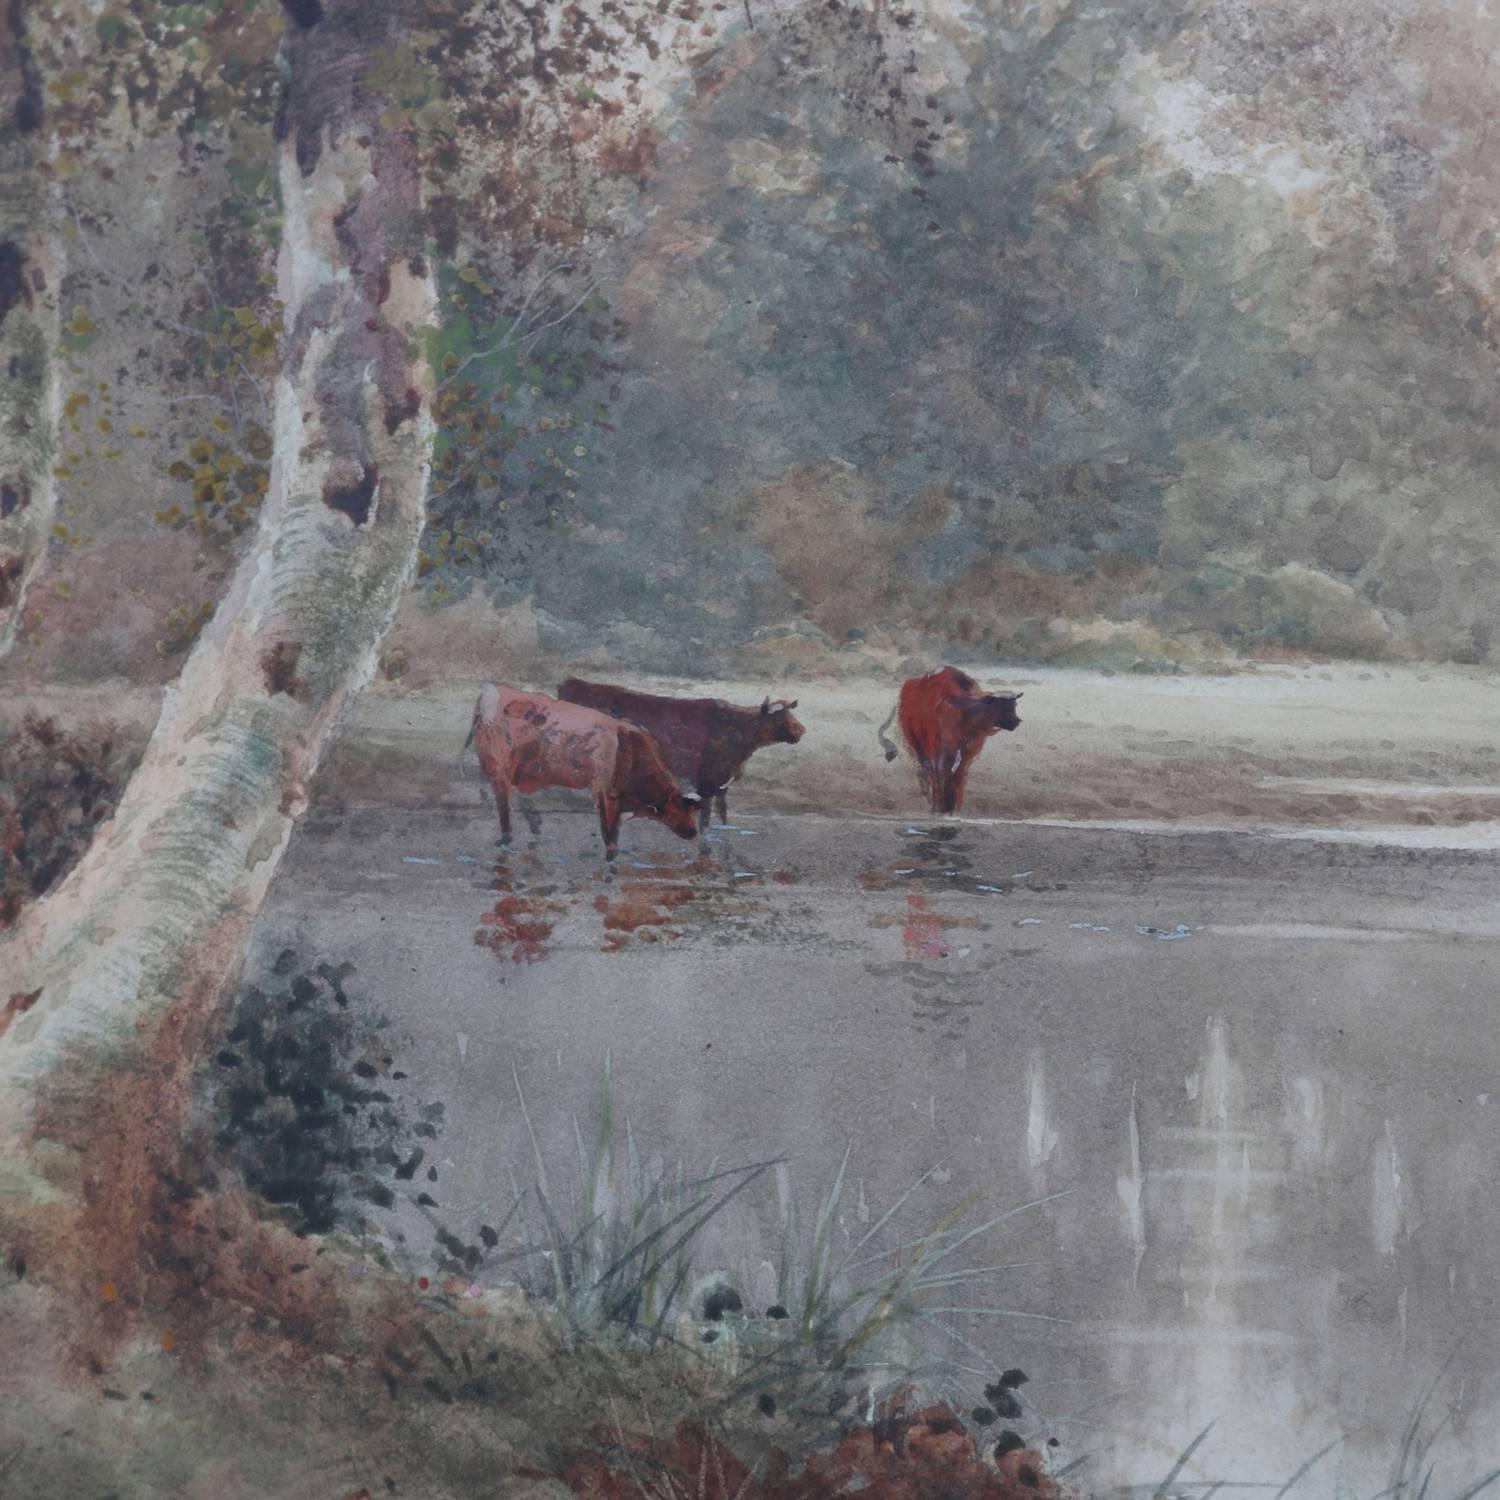 Antique English landscape watercolor painting by Creswick Boydell, R.C.A. (Royal Academy of Art), depicts grazing cattle (cows) near pond or river, reminiscent of Hudson River School, circa 1903

Measures - fr: 23